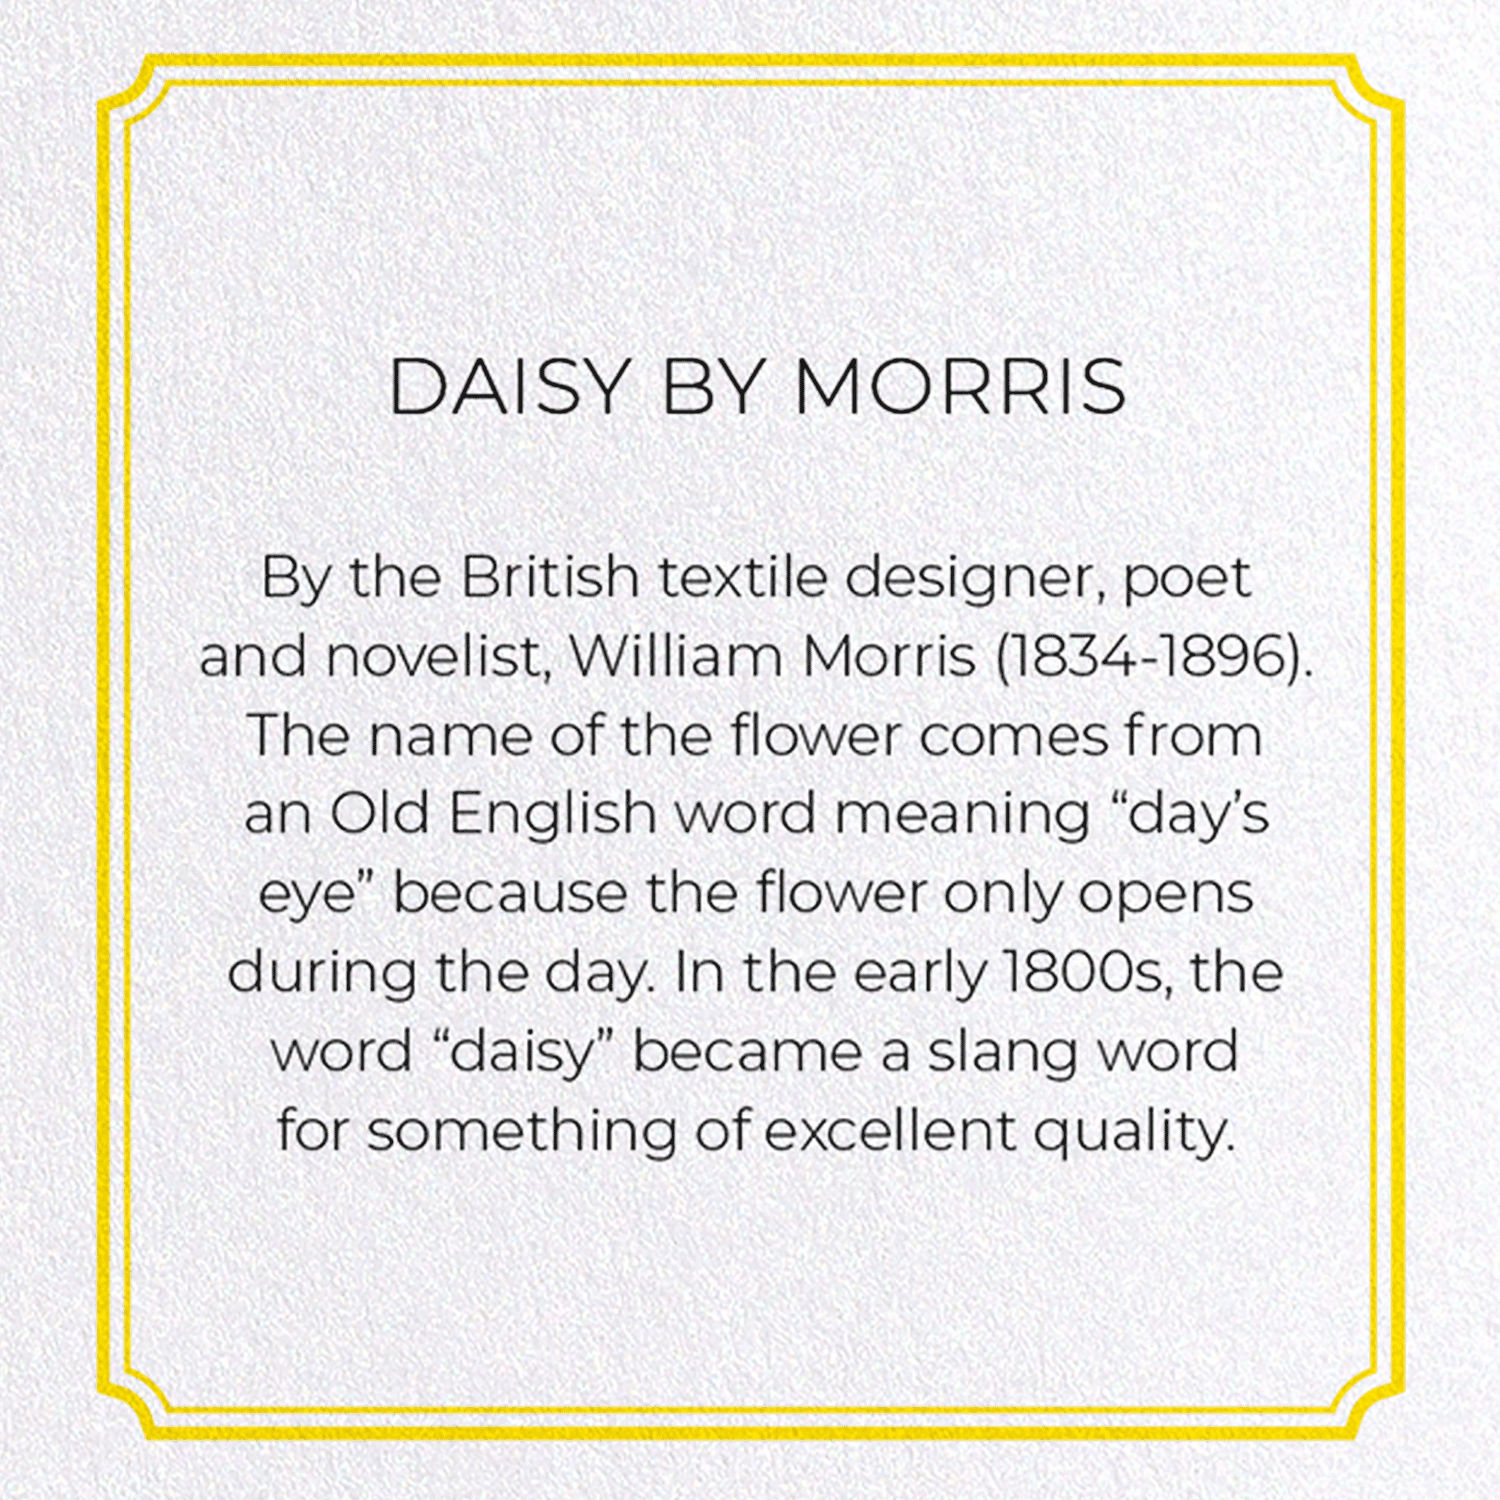 DAISY BY MORRIS: Pattern Greeting Card